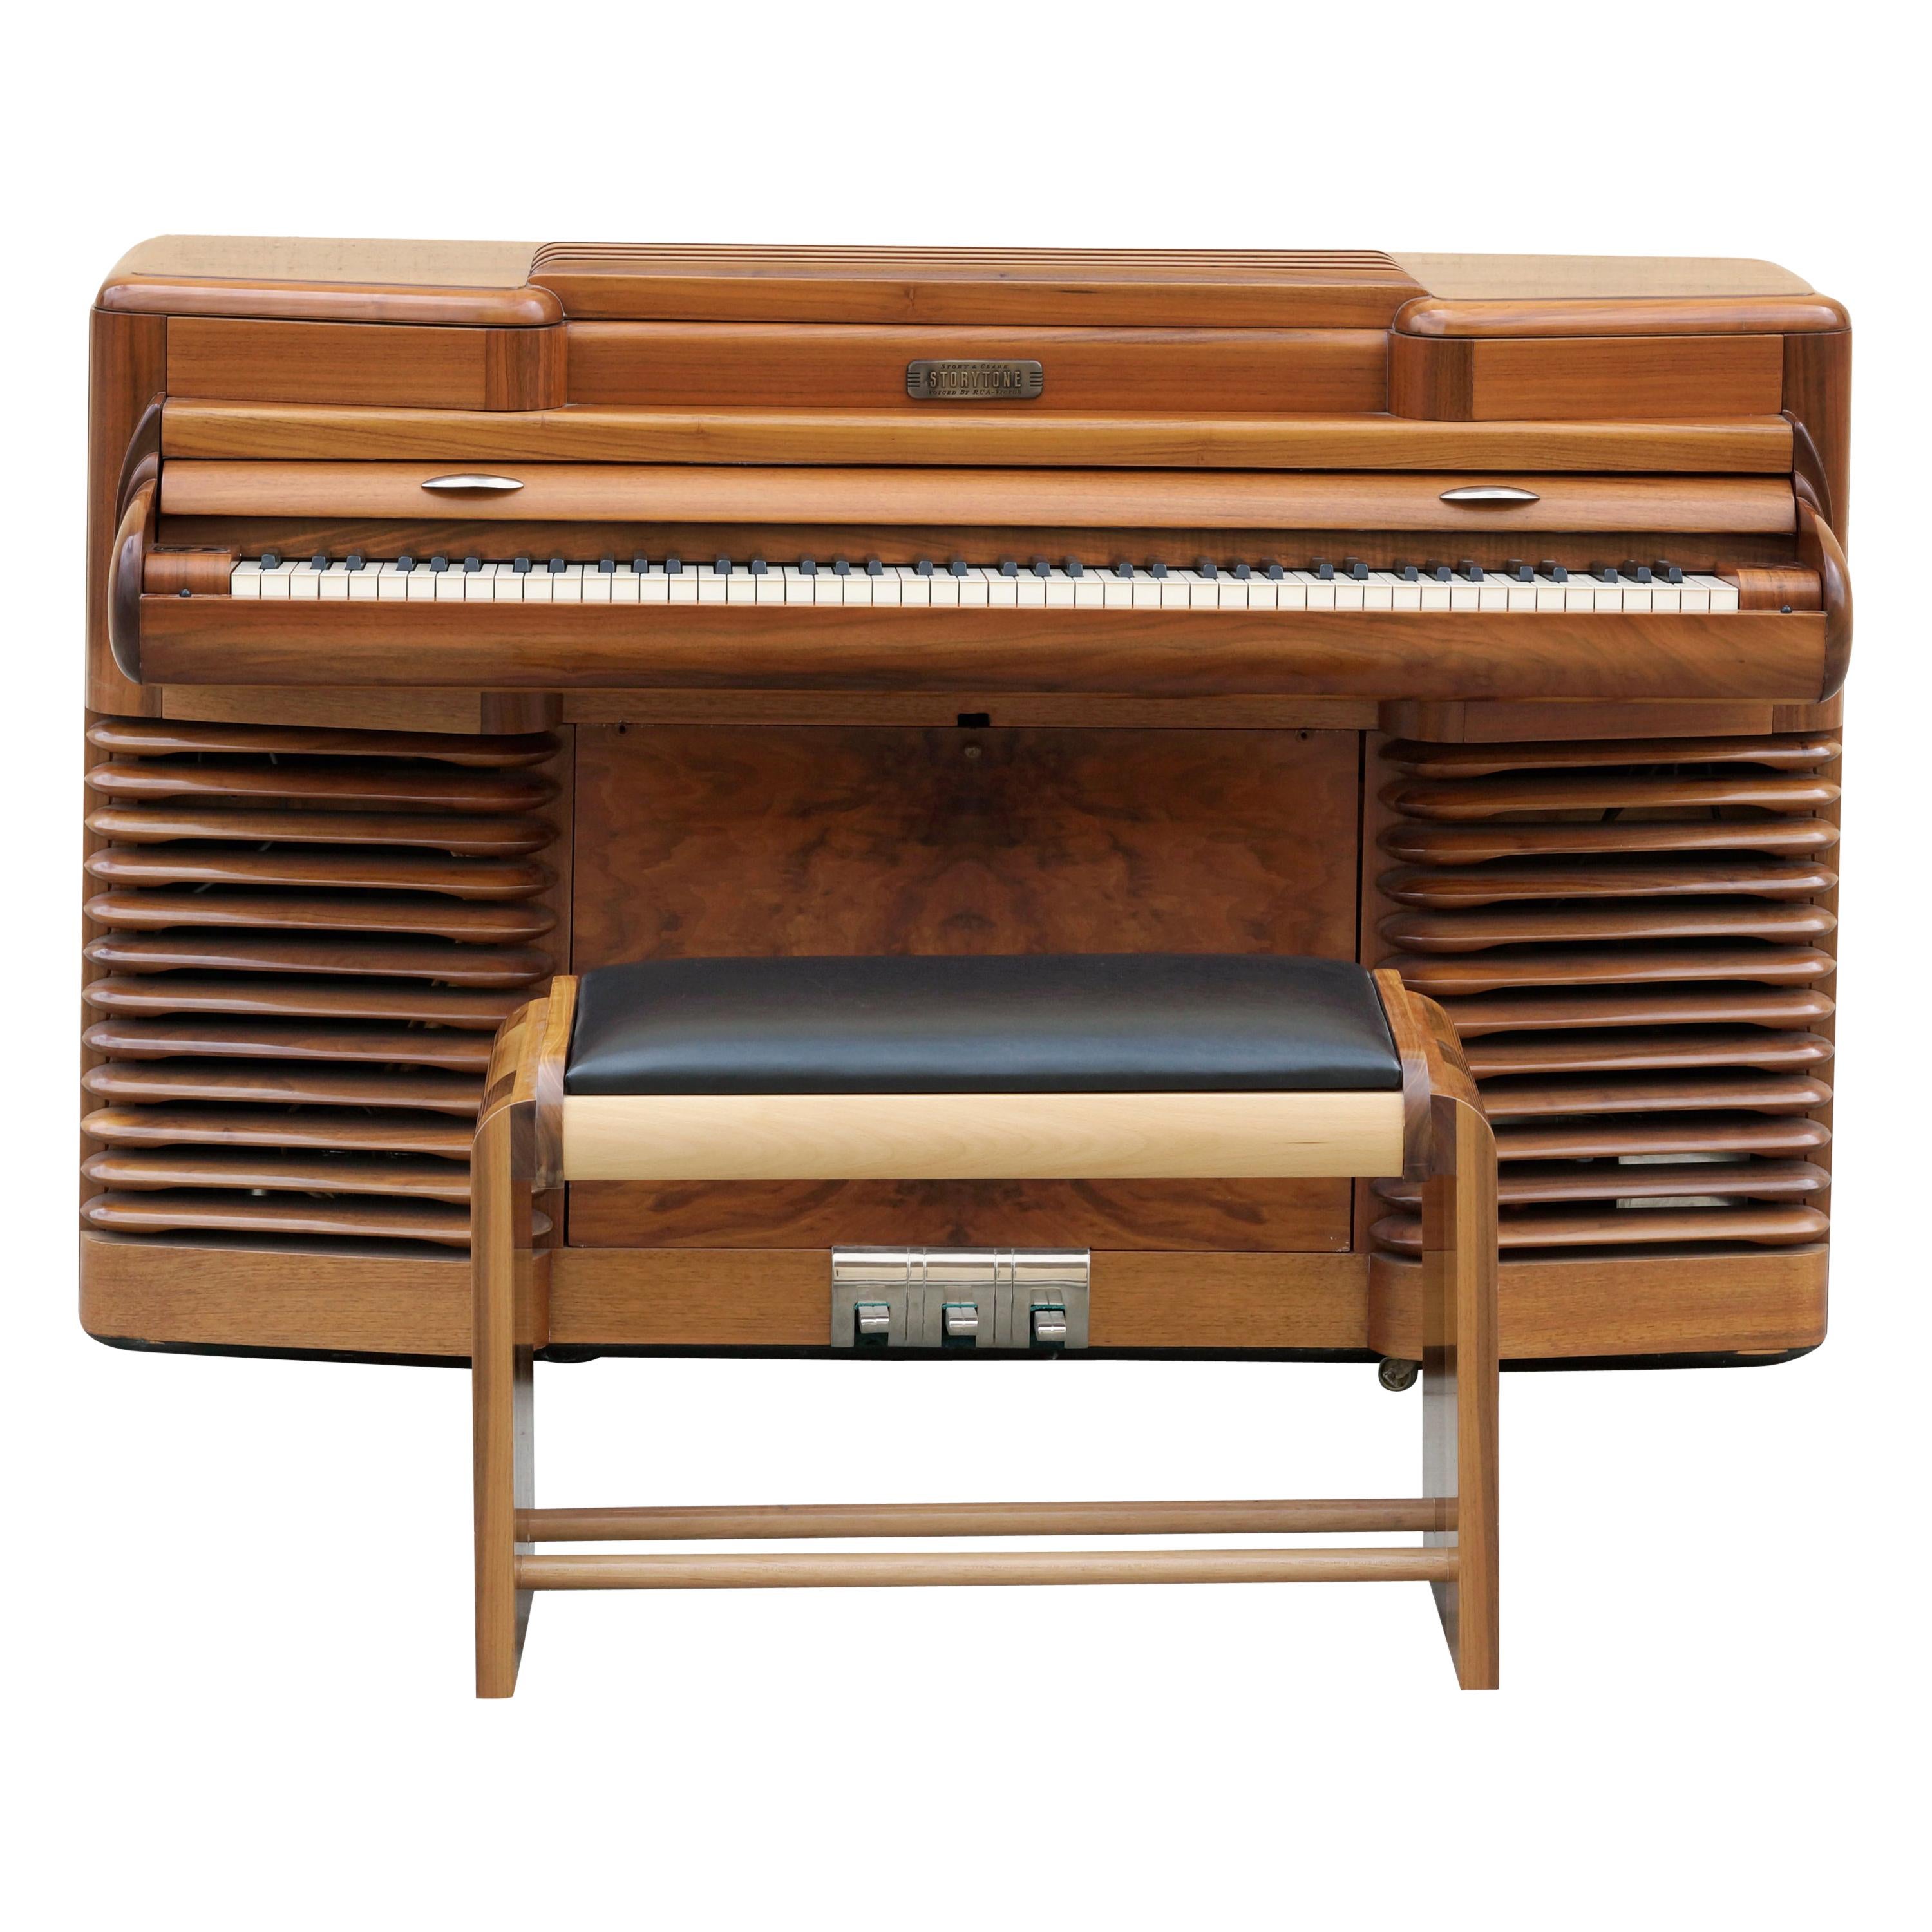 1939 Original Story & Clark "Storytone" Electric Piano and Bench For Sale